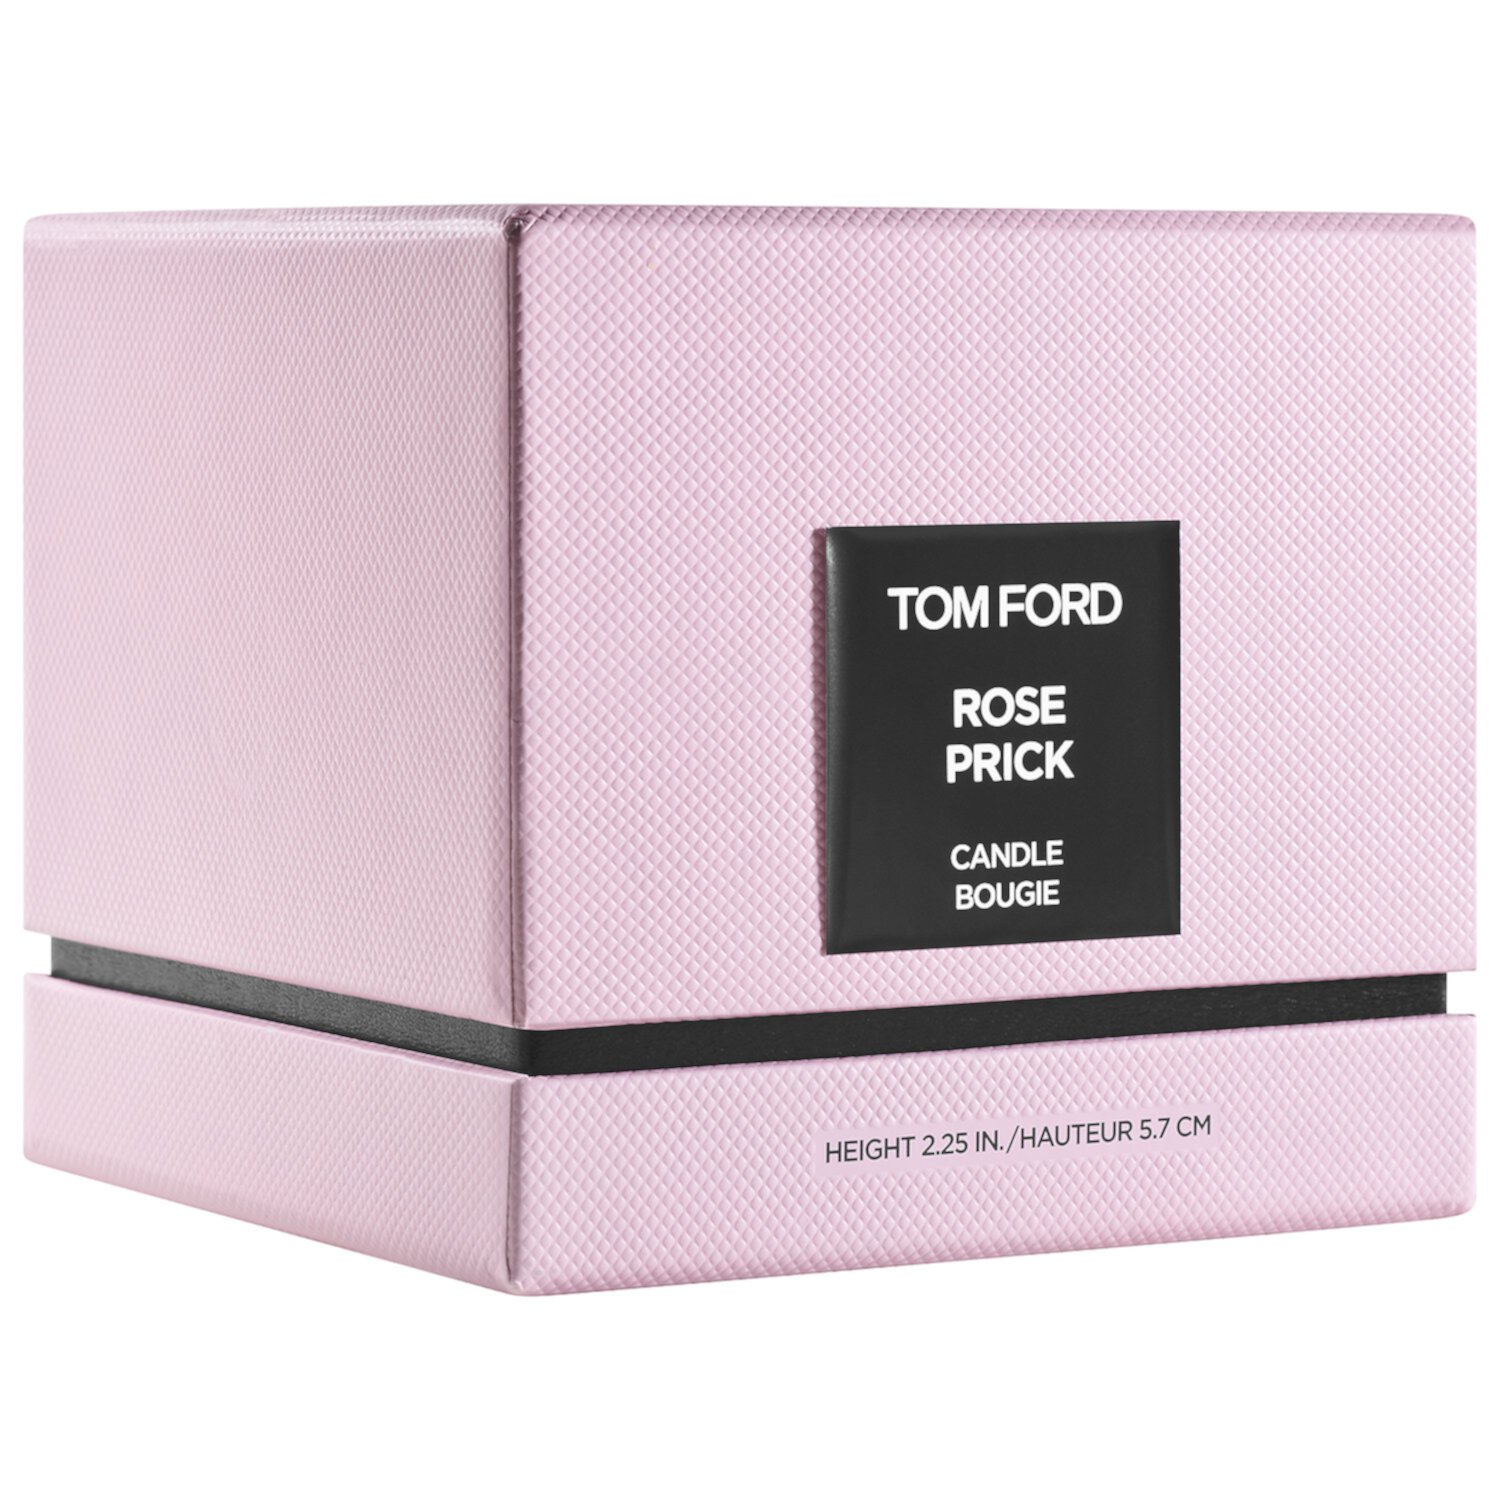 Rose Prick Home Candle Tom Ford